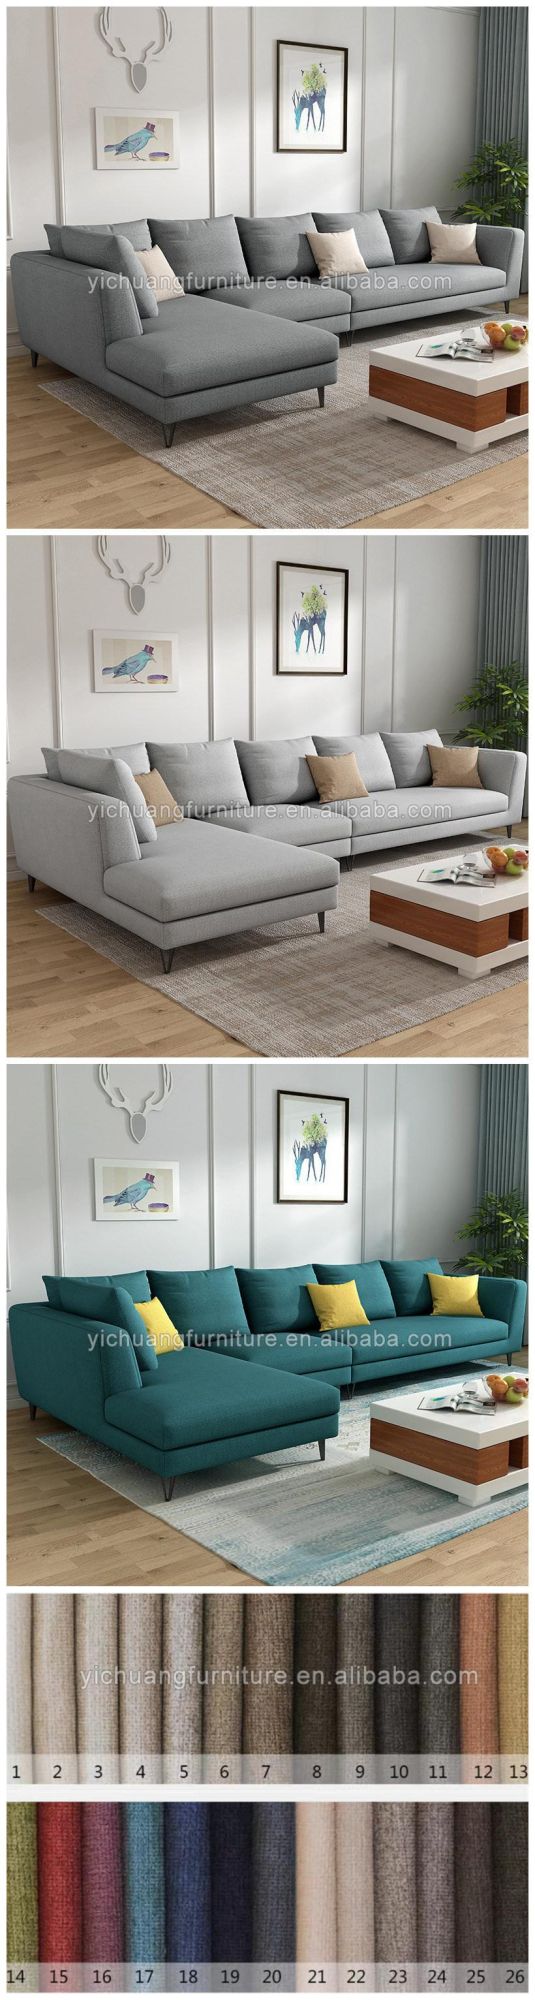 Home Furniture Modern Sofa Linen Fabric Gray Couch Living Room Furniture